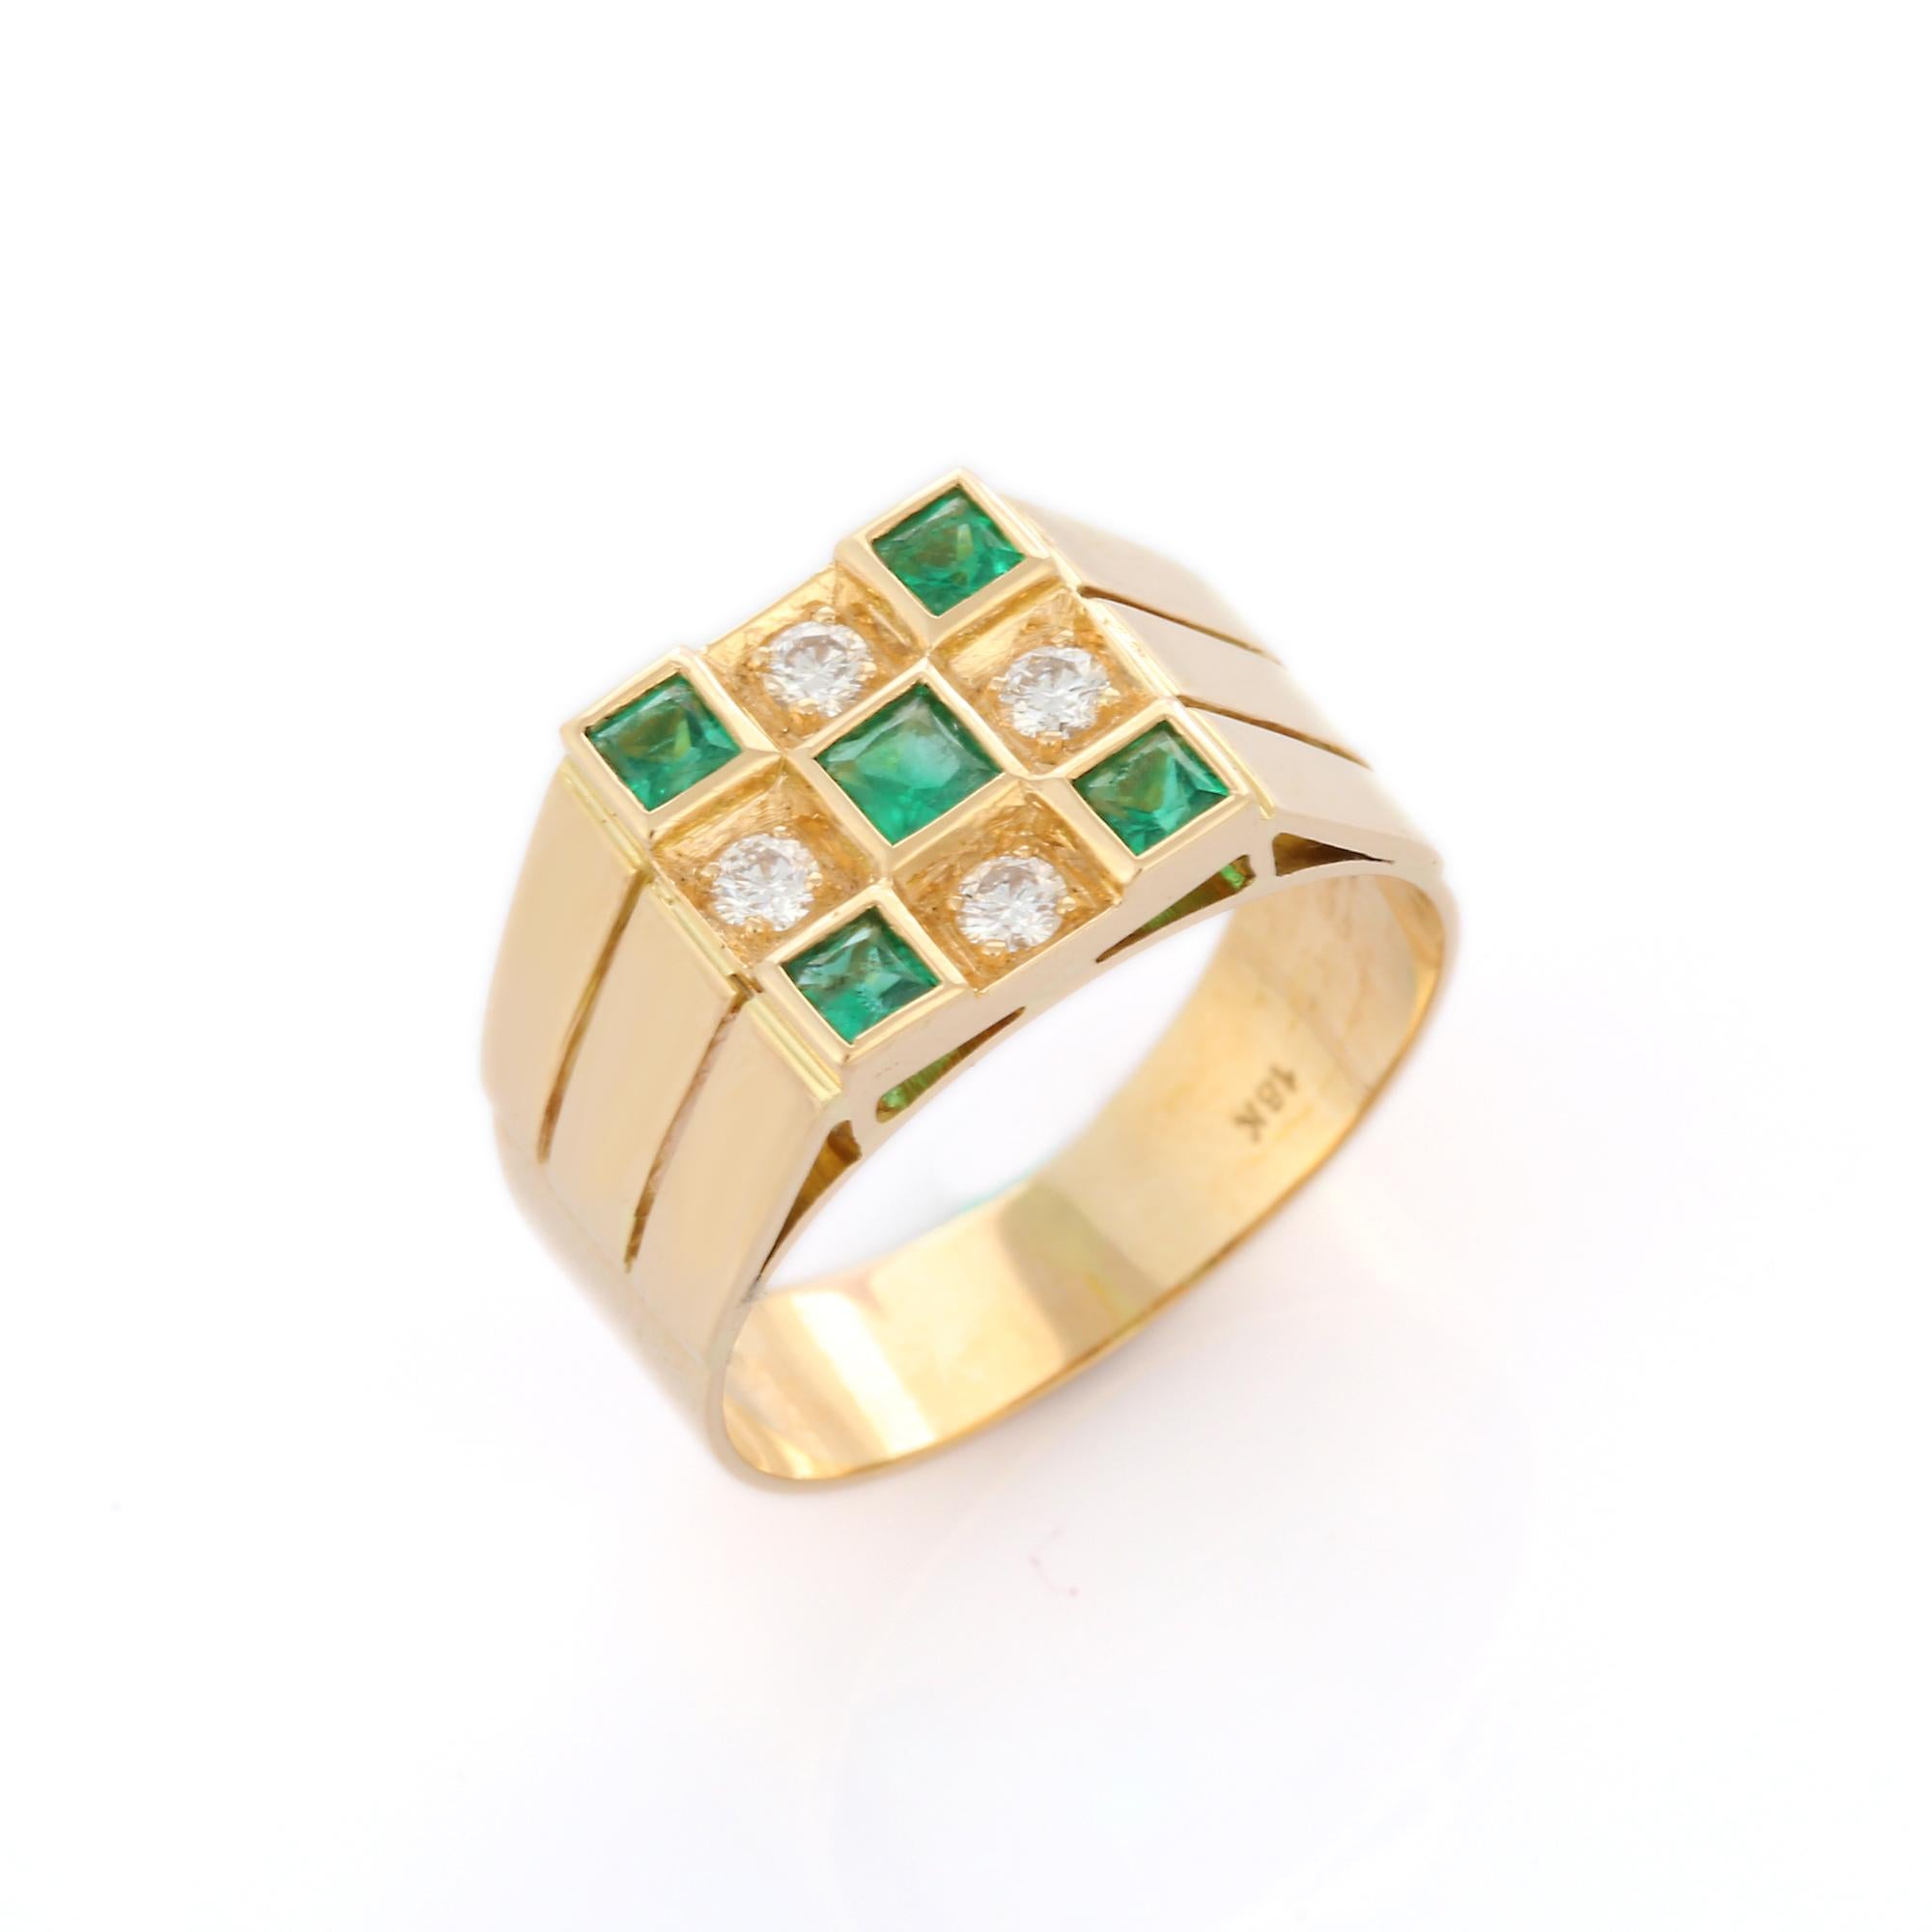 For Sale:  Natural Emerald and Diamond Engagement Ring in 18k Solid Yellow Gold Men's Ring 2